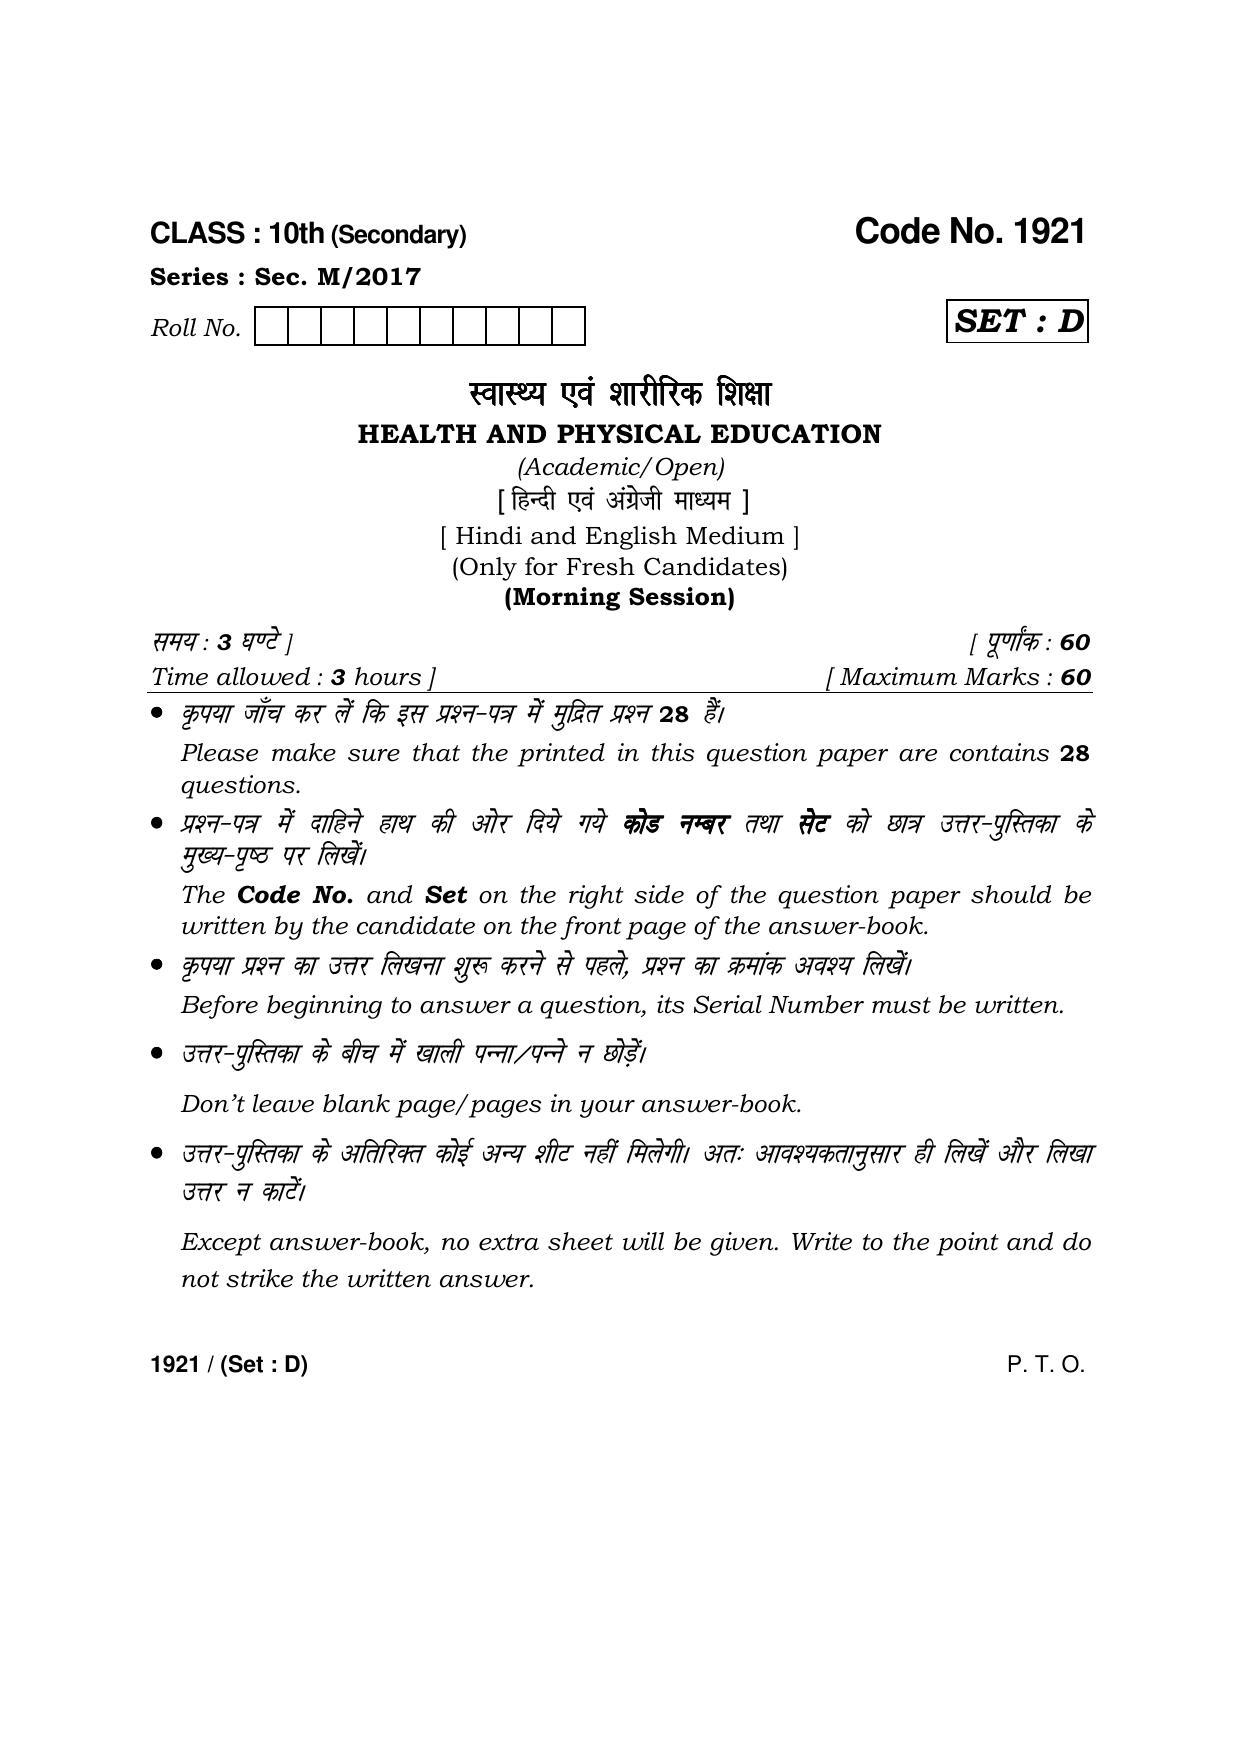 Haryana Board HBSE Class 10 Health & Physical Education -D 2017 Question Paper - Page 1